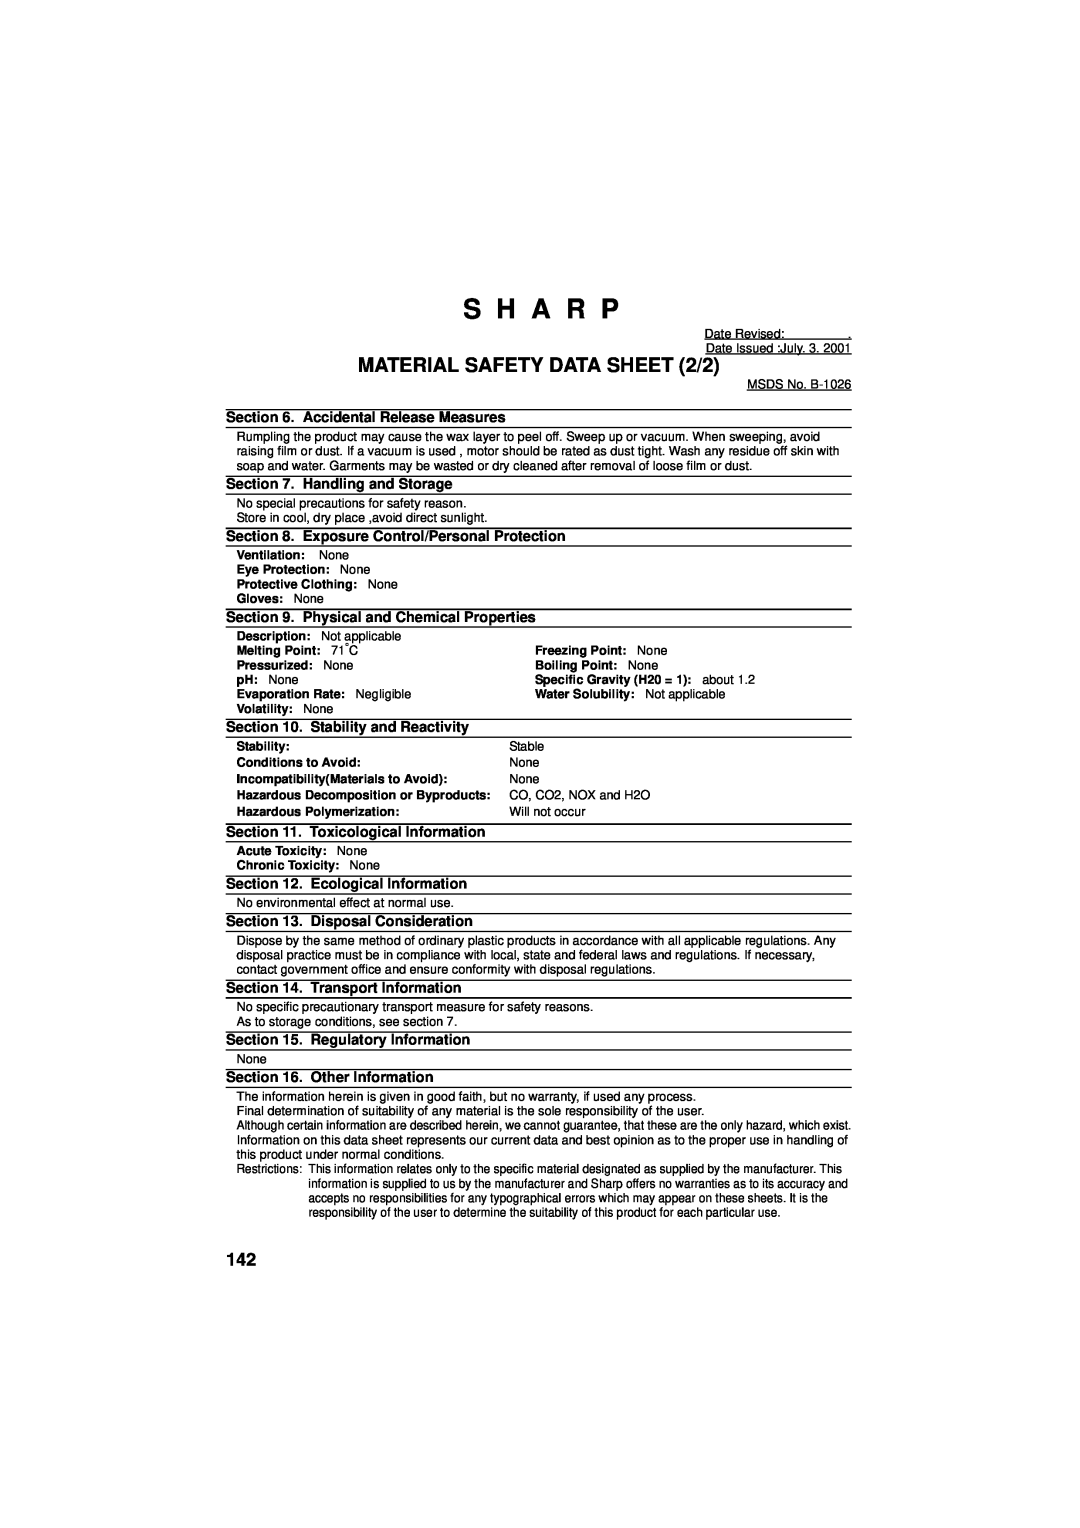 Sharp UX-CD600 operation manual S H A R P, MATERIAL SAFETY DATA SHEET 2/2 